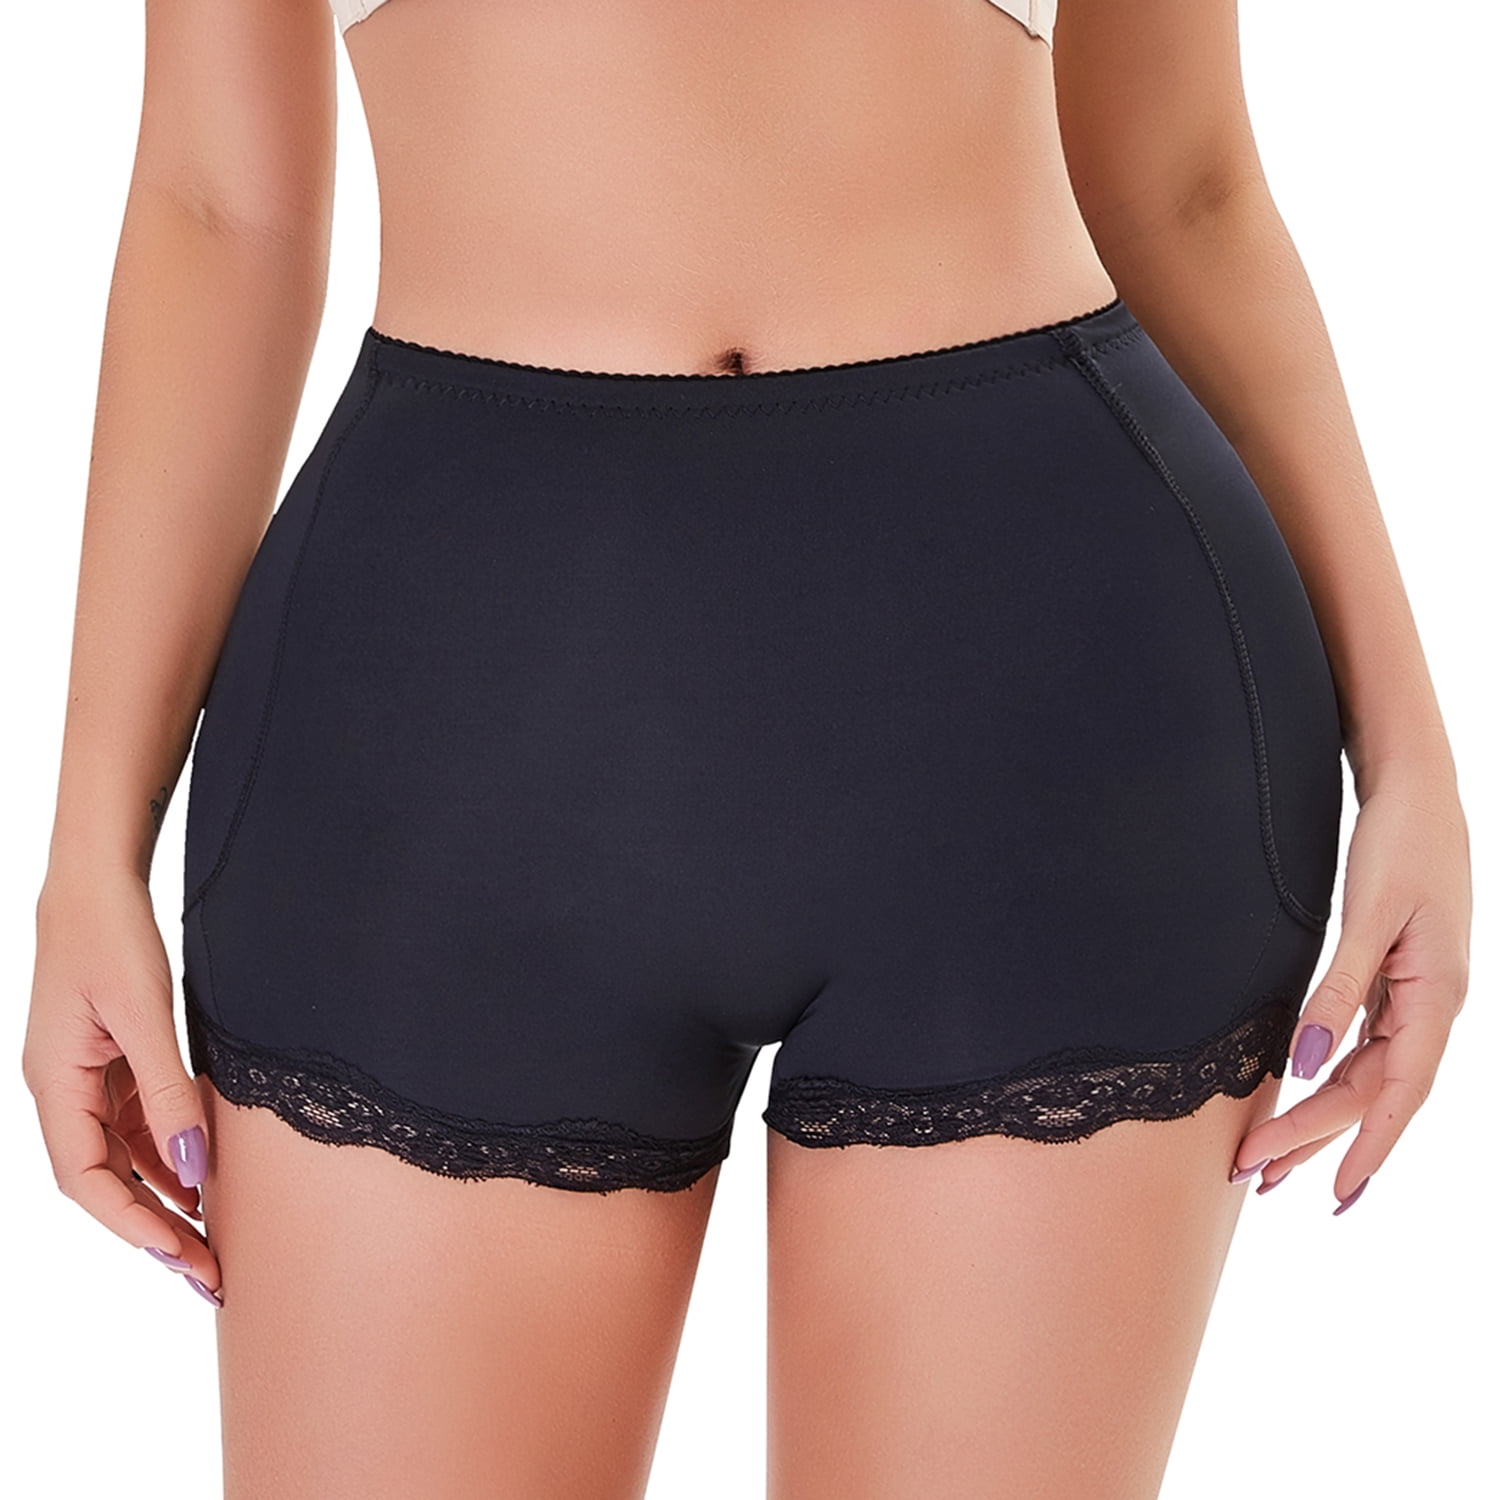 Homgro Women's Plus Size Removable Butt Pads Lace Booty Lifting Hip Dip  Shapewear Shorts Thigh Butt Lifter Hip Enhancer Underwear Black 4X-Large 